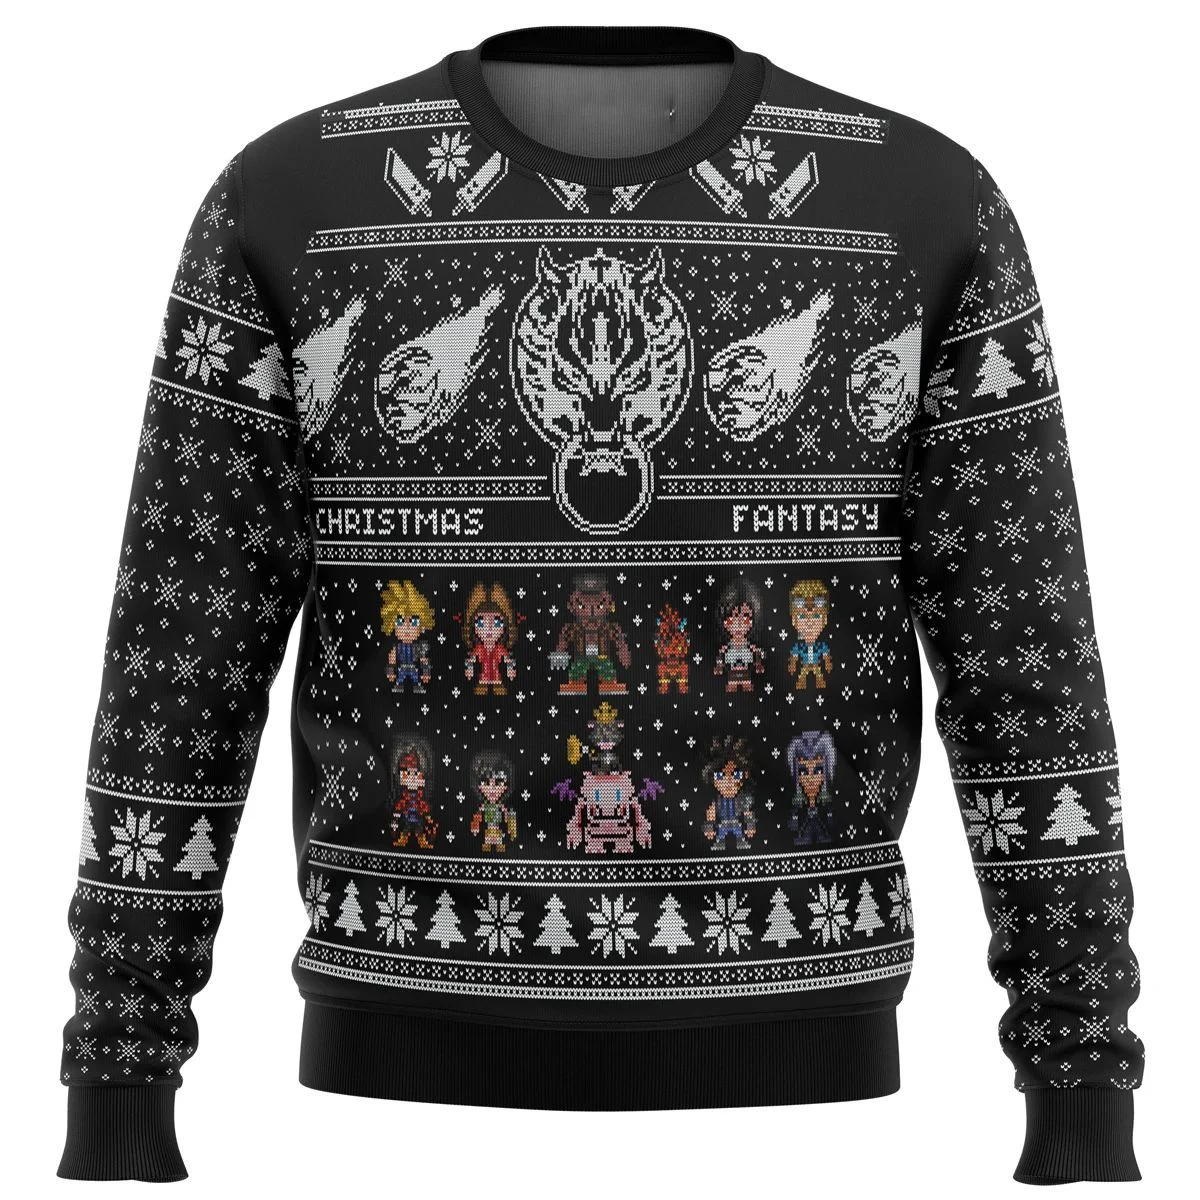 

Final Fantasy Classic 8bit Ugly Christmas Sweater Christmas Sweater gift Santa Claus pullover men 3D Sweatshirt and top autumn a